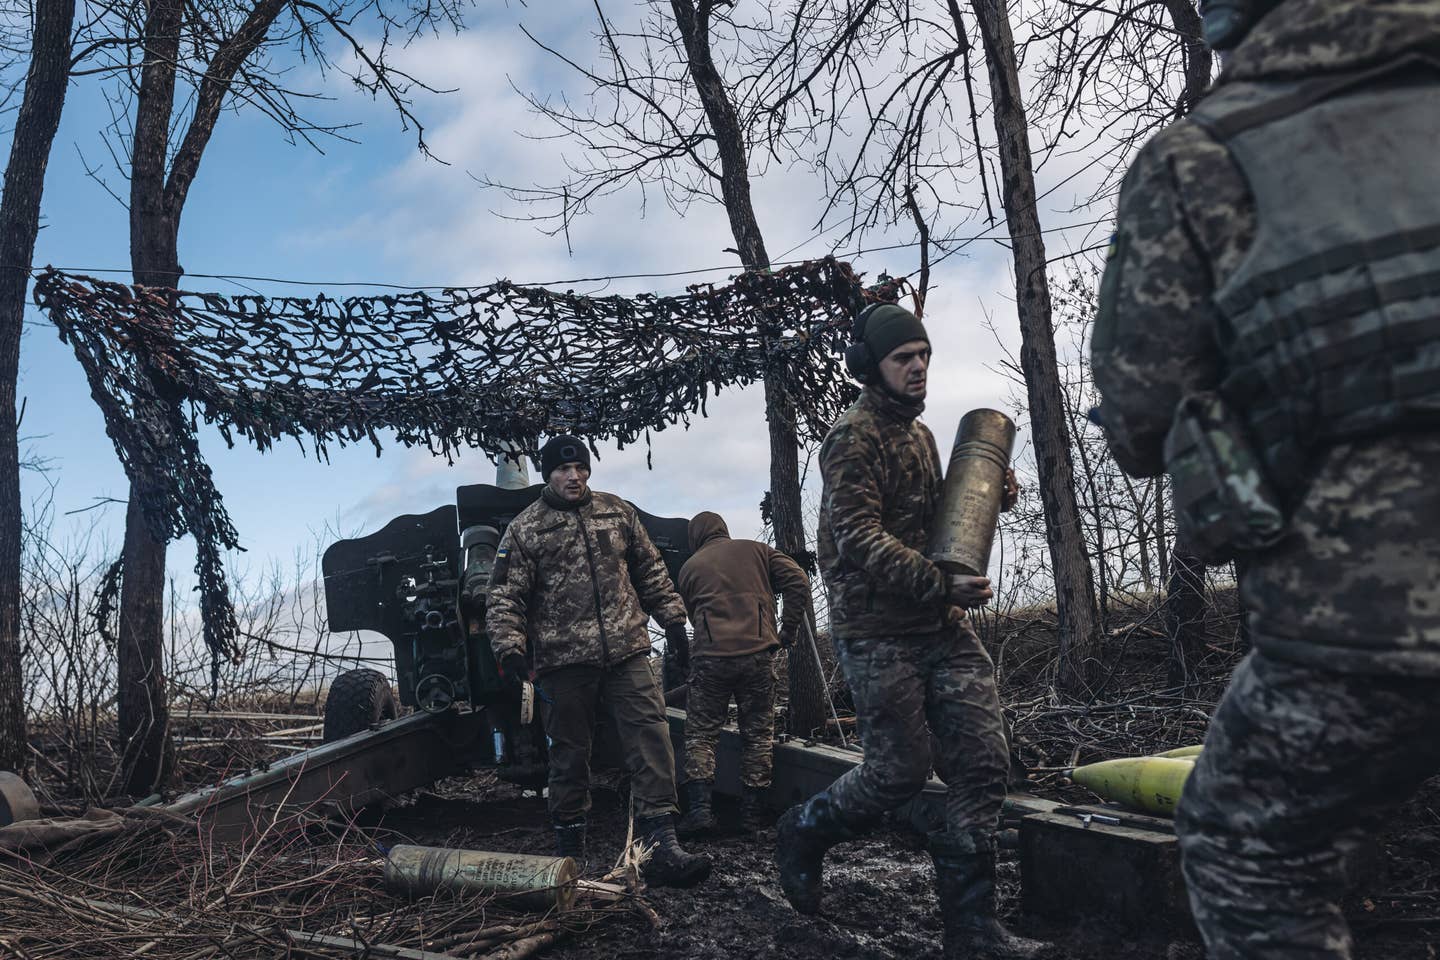 Ukrainian soldiers are seen preparing for artillery fire on the Donbas frontline in Ukraine on December 28, 2022. A previously fired and reloaded OF-25T case can be seen both on the ground and in the center soldier's hands. <em>Photo by Diego Herrera Carcedo/Anadolu Agency via Getty Images</em>